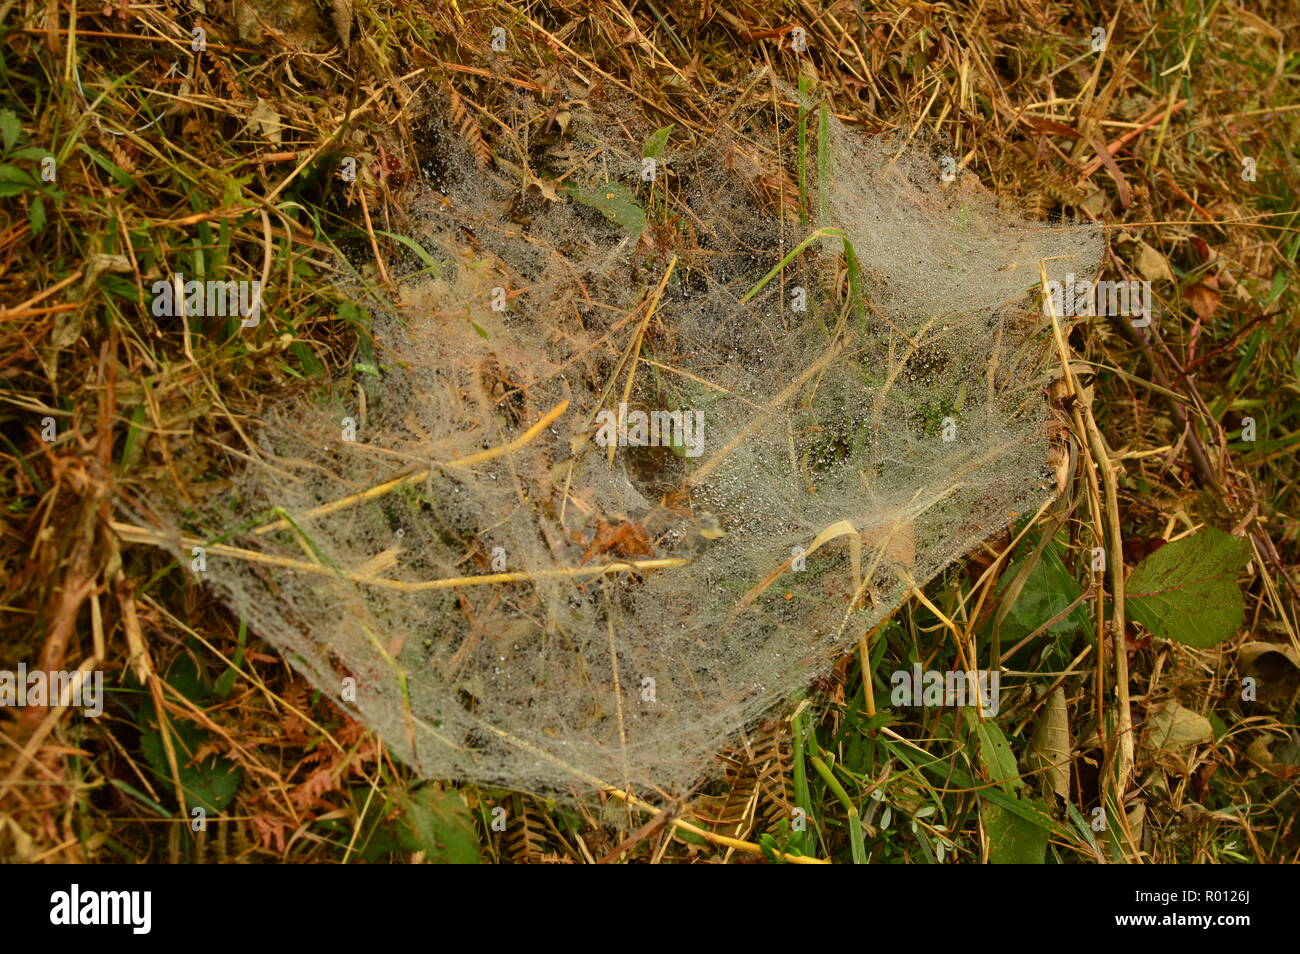 Spider Webs Covered By The Morning Dew In Rebedul. Nature, Animals, Landscapes, Travel. August 2, 2018. Rebedul, Lugo, Galicia, Spain. Stock Photo